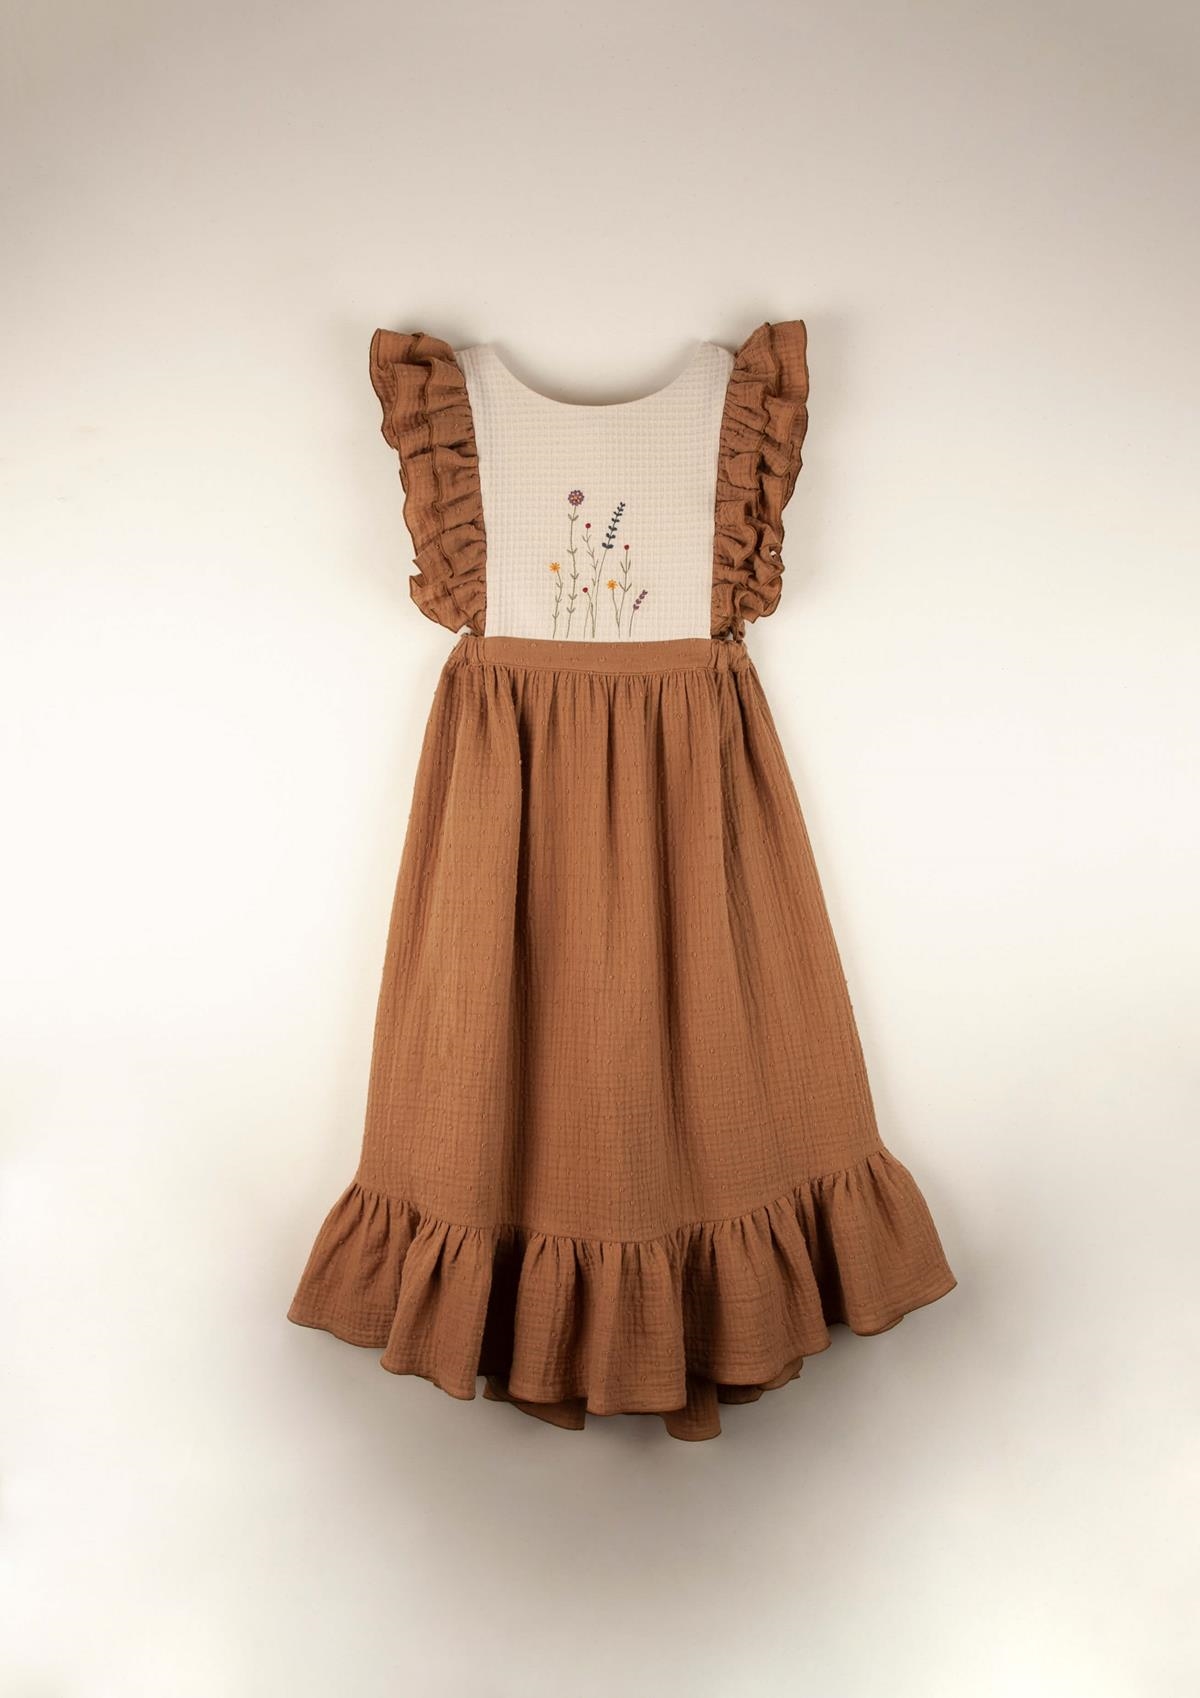 Mod.34.1 Terracotta organic bibbed dress with embroidery | SS22 Mod.34.1 Terracotta organic bibbed dress with embroidery | 1